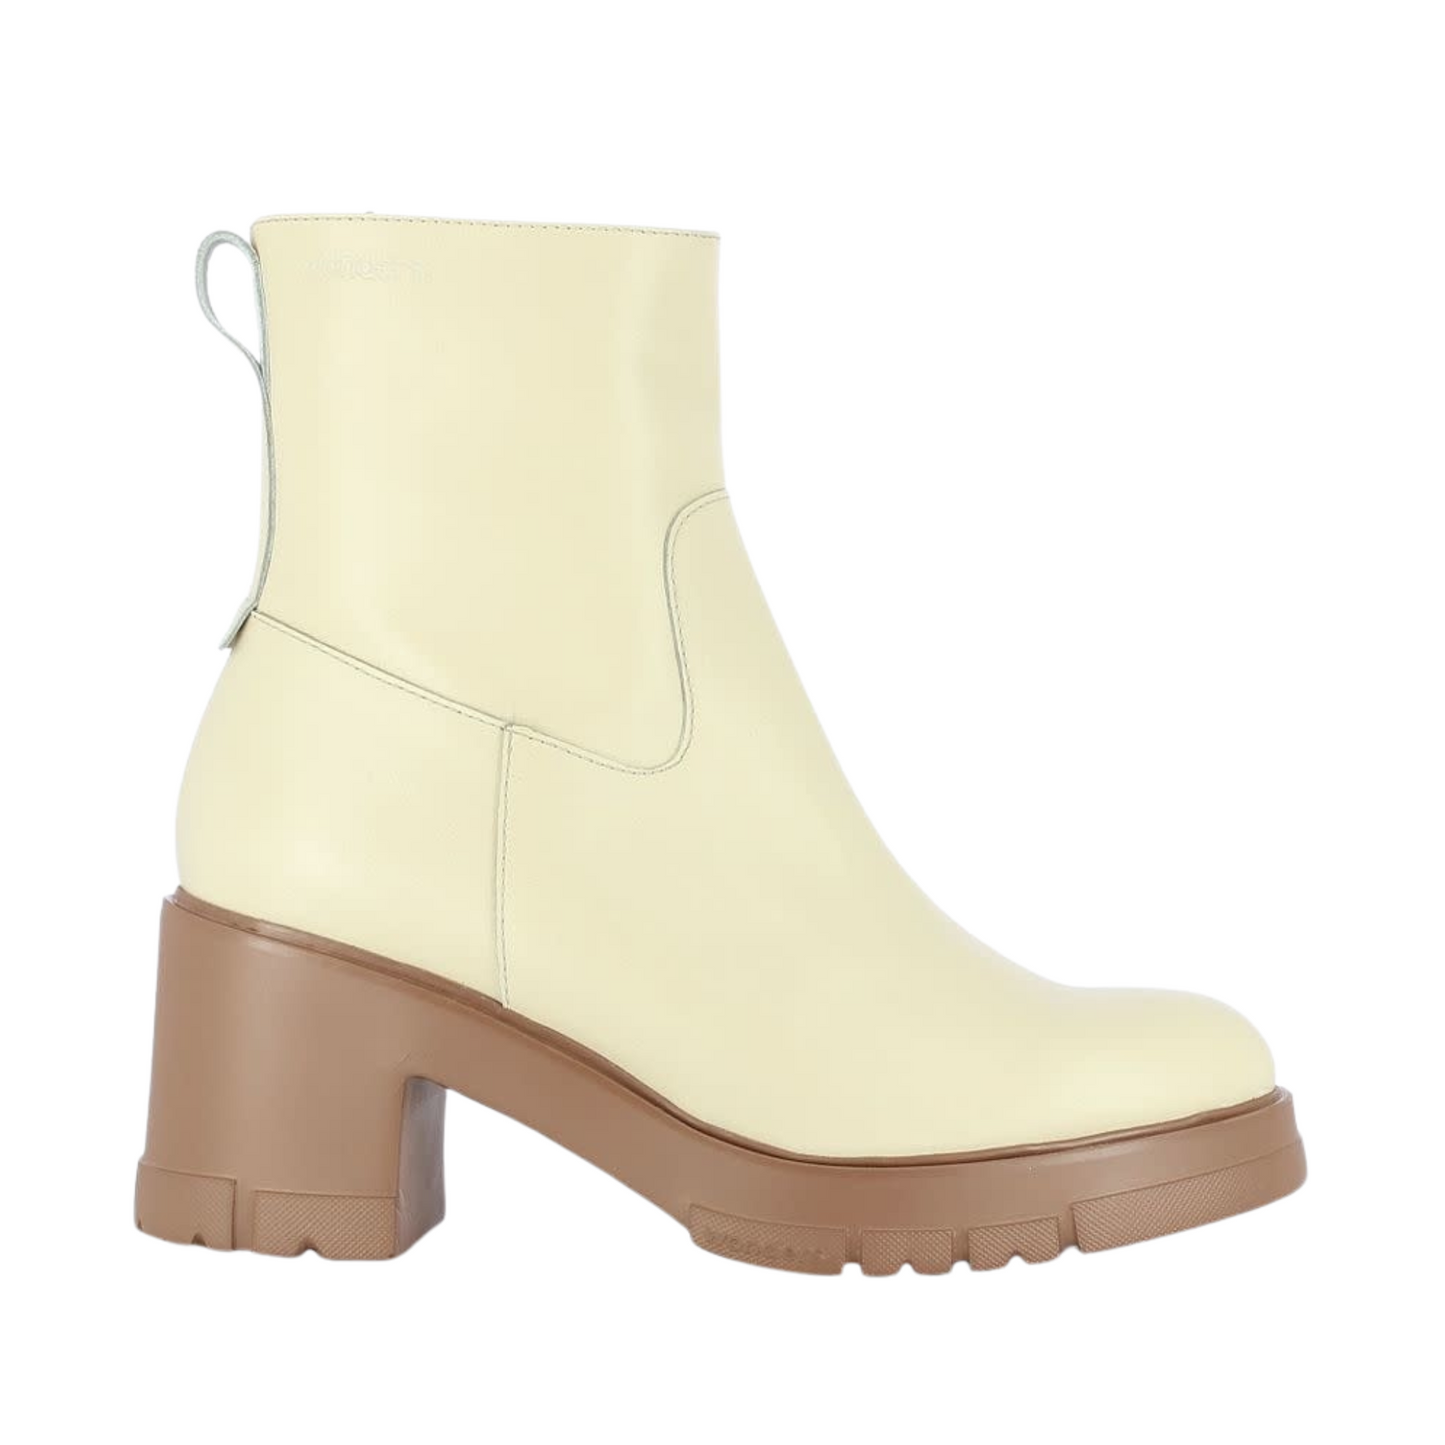 A right side view of a cream coloured leather boot with a caramel coloured outsole.